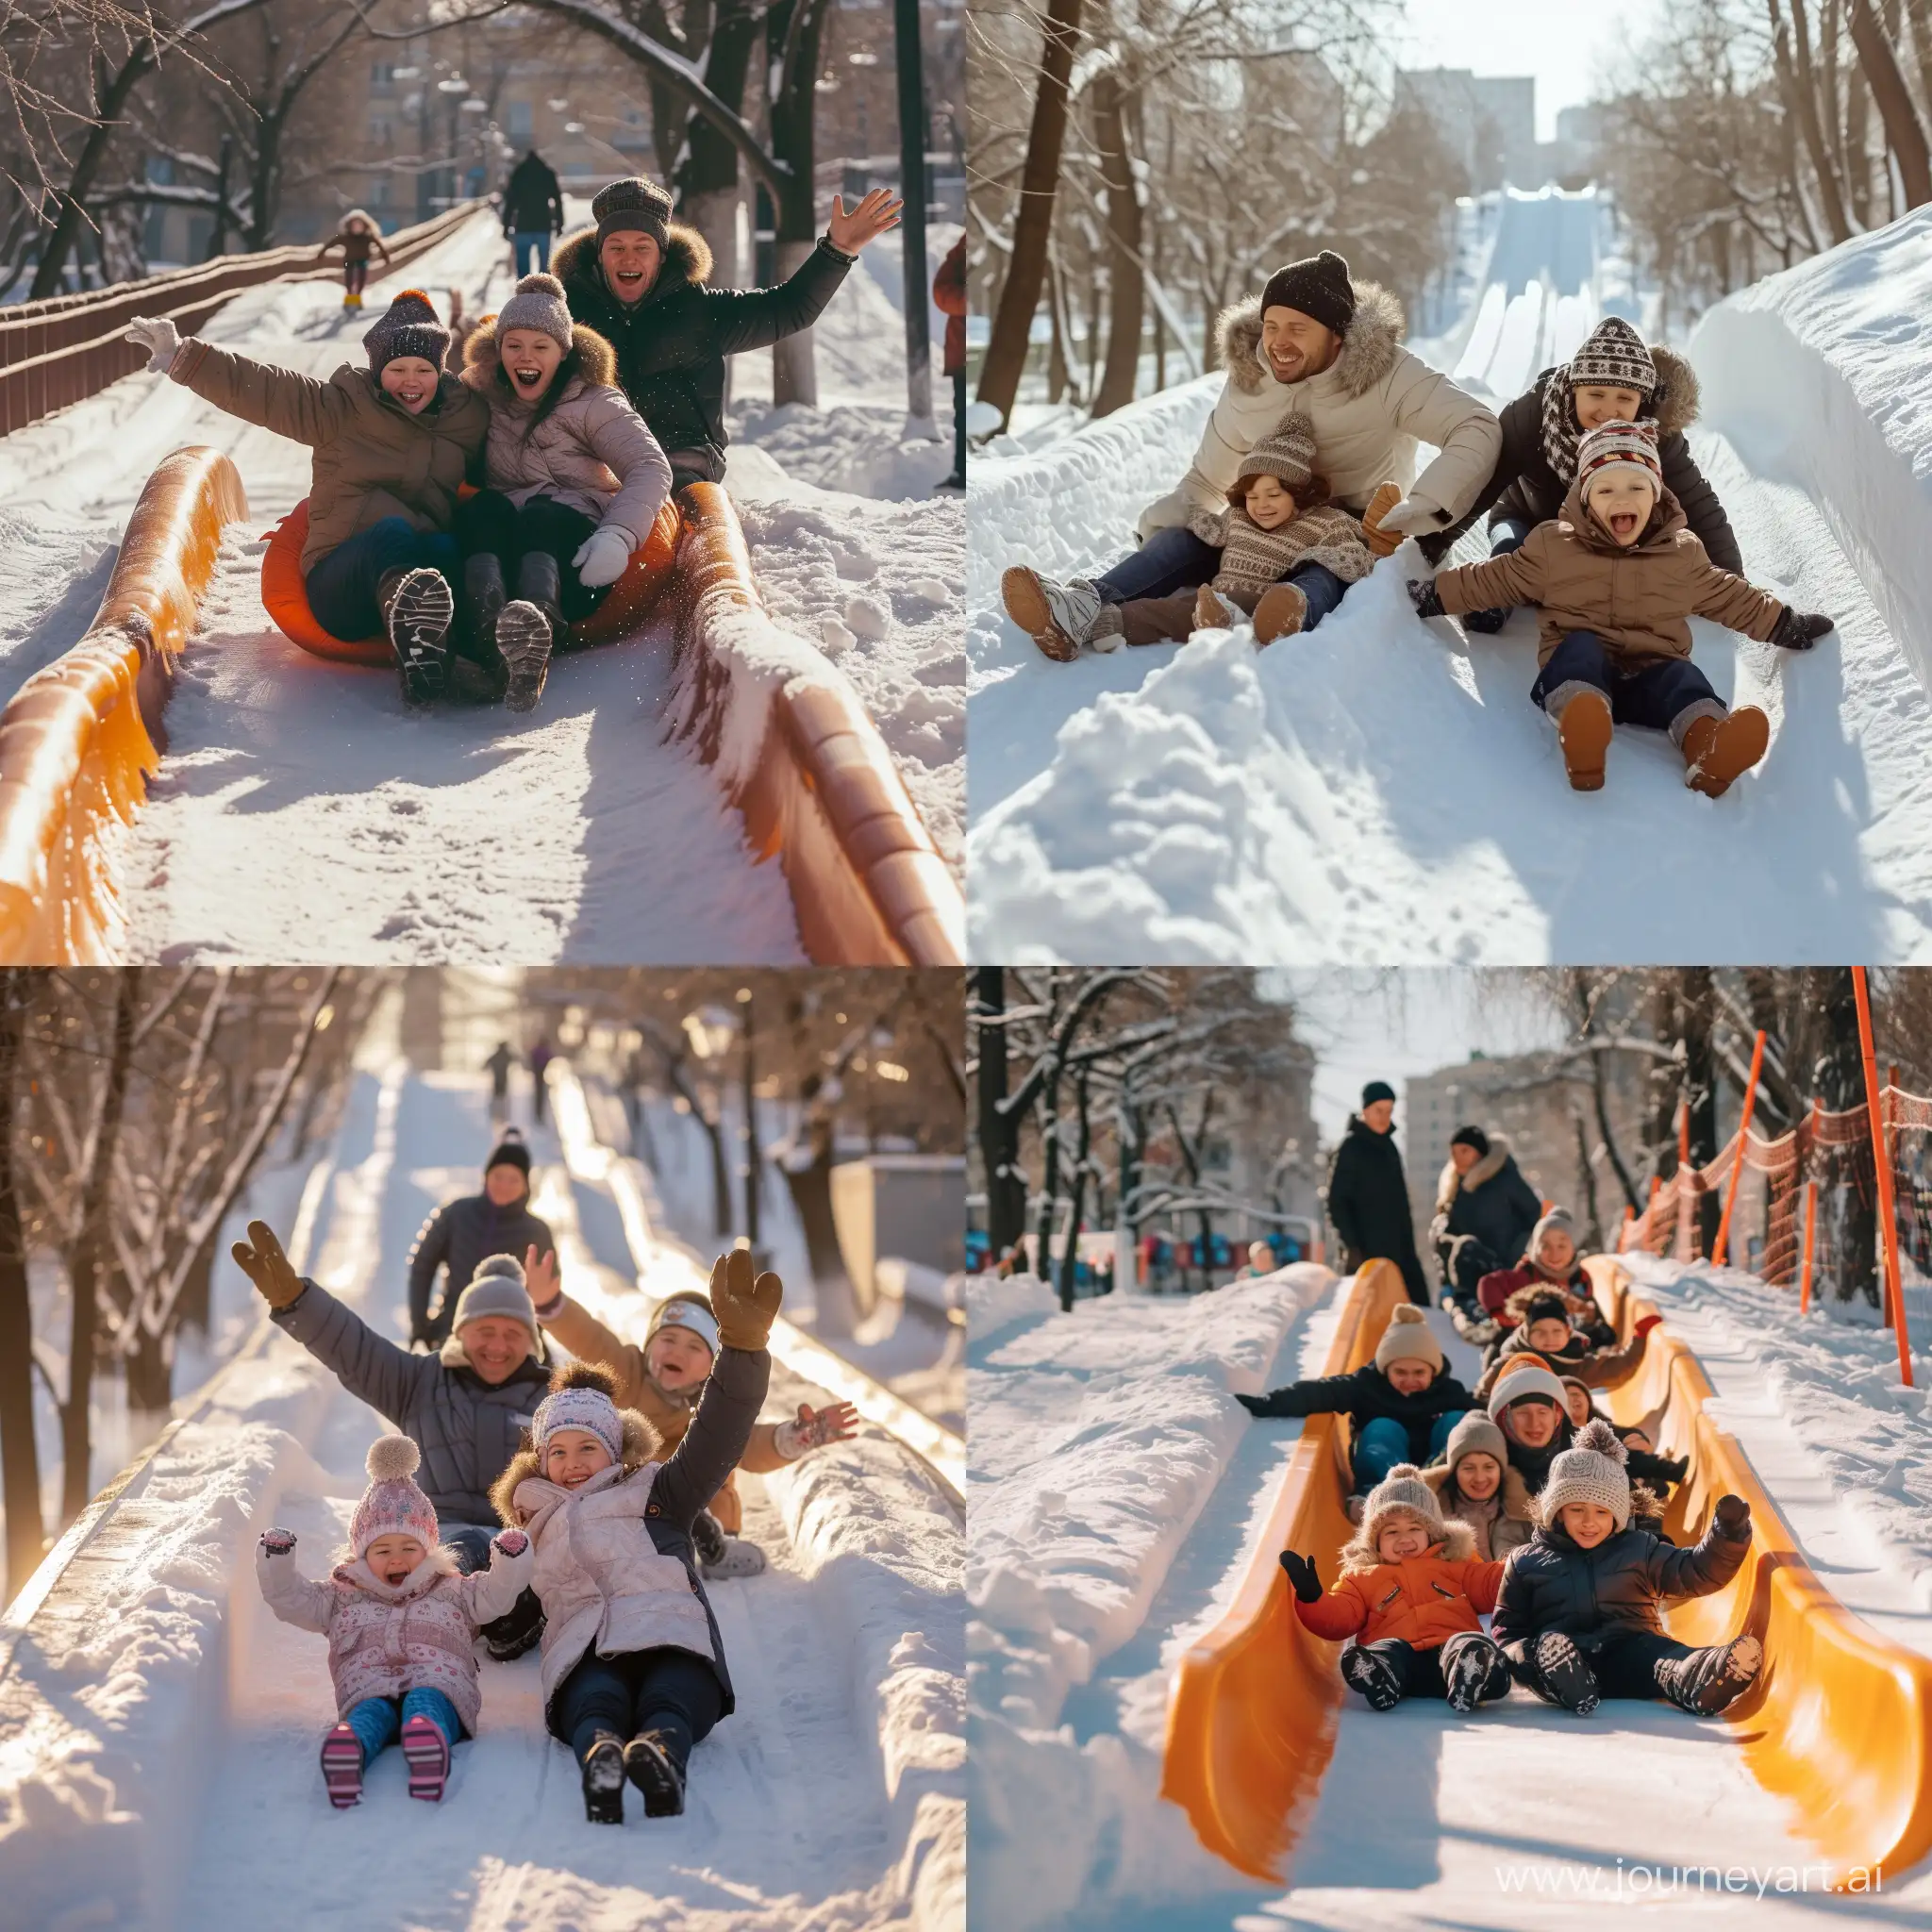 A cheerful family rolls down a snow slide in the Tverskoy district of Moscow. I need a photo